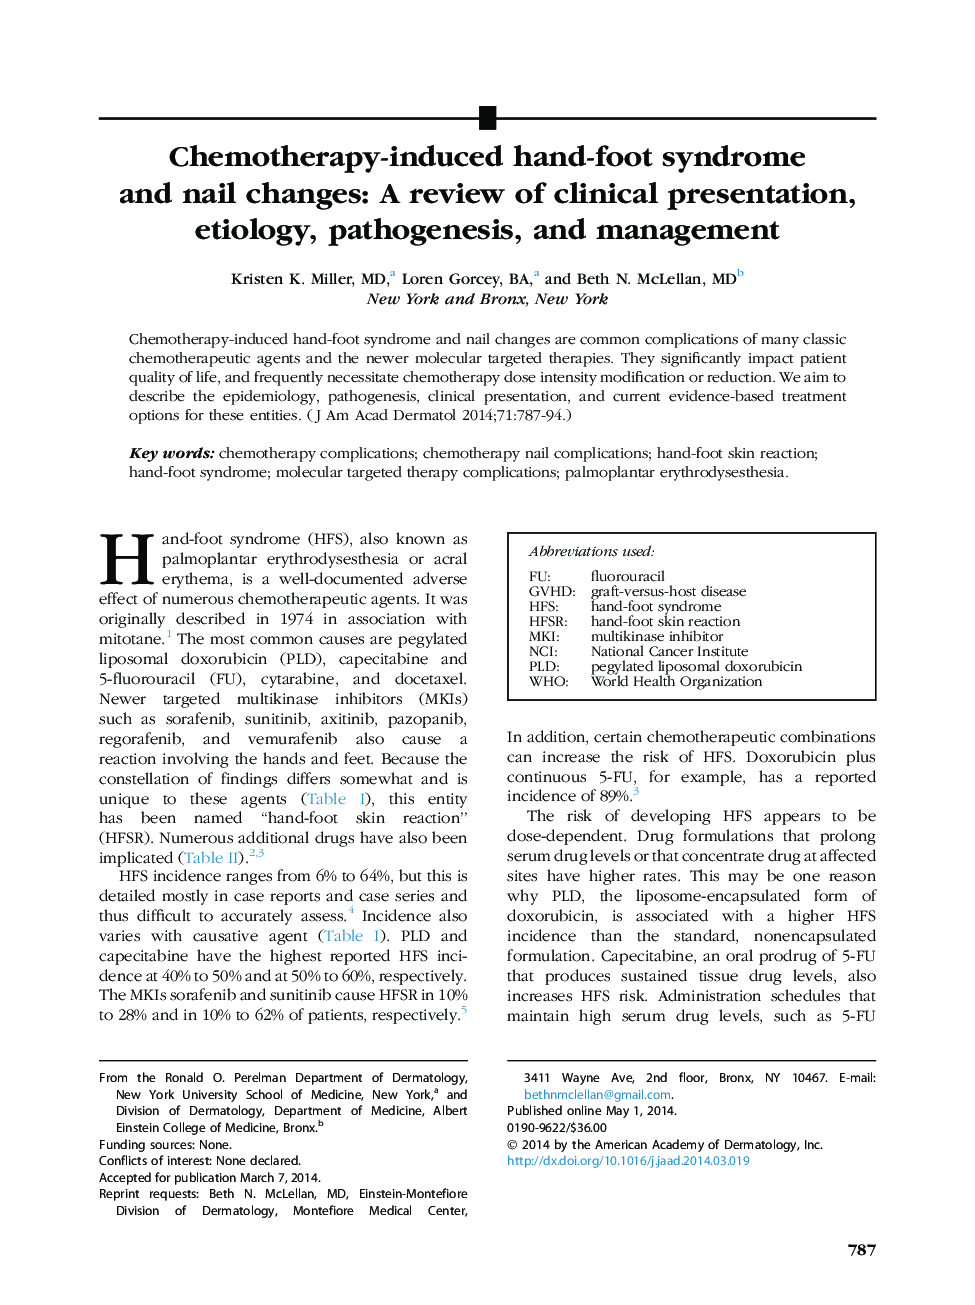 Chemotherapy-induced hand-foot syndrome andÂ nailÂ changes: A review of clinical presentation, etiology, pathogenesis, and management